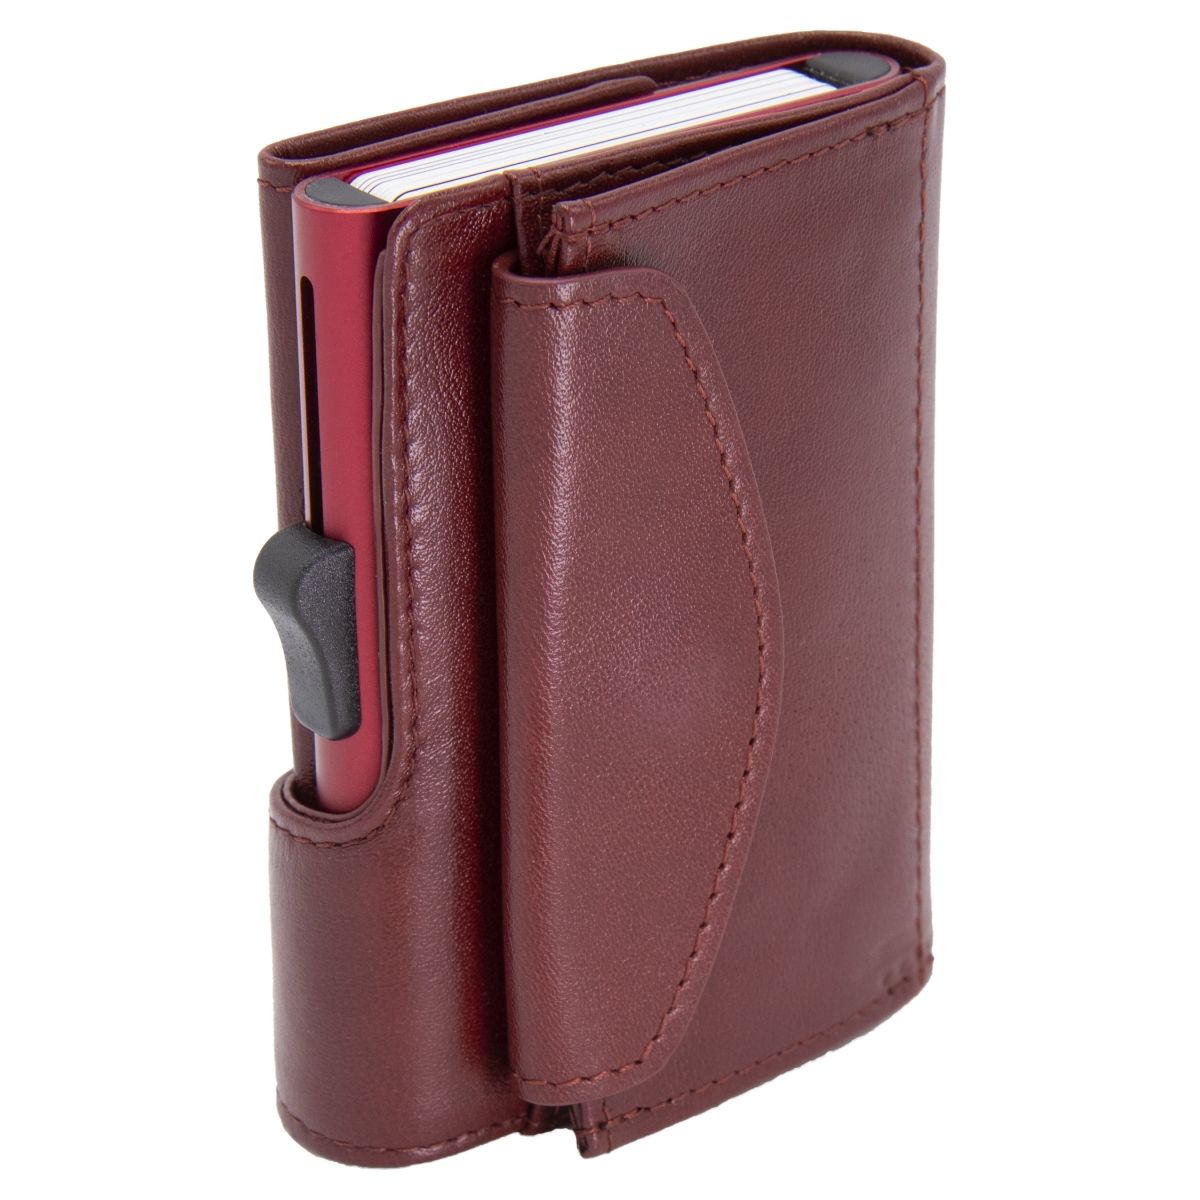 XL Aluminum Wallet with Genuine Leather and Coins Pocket - Red